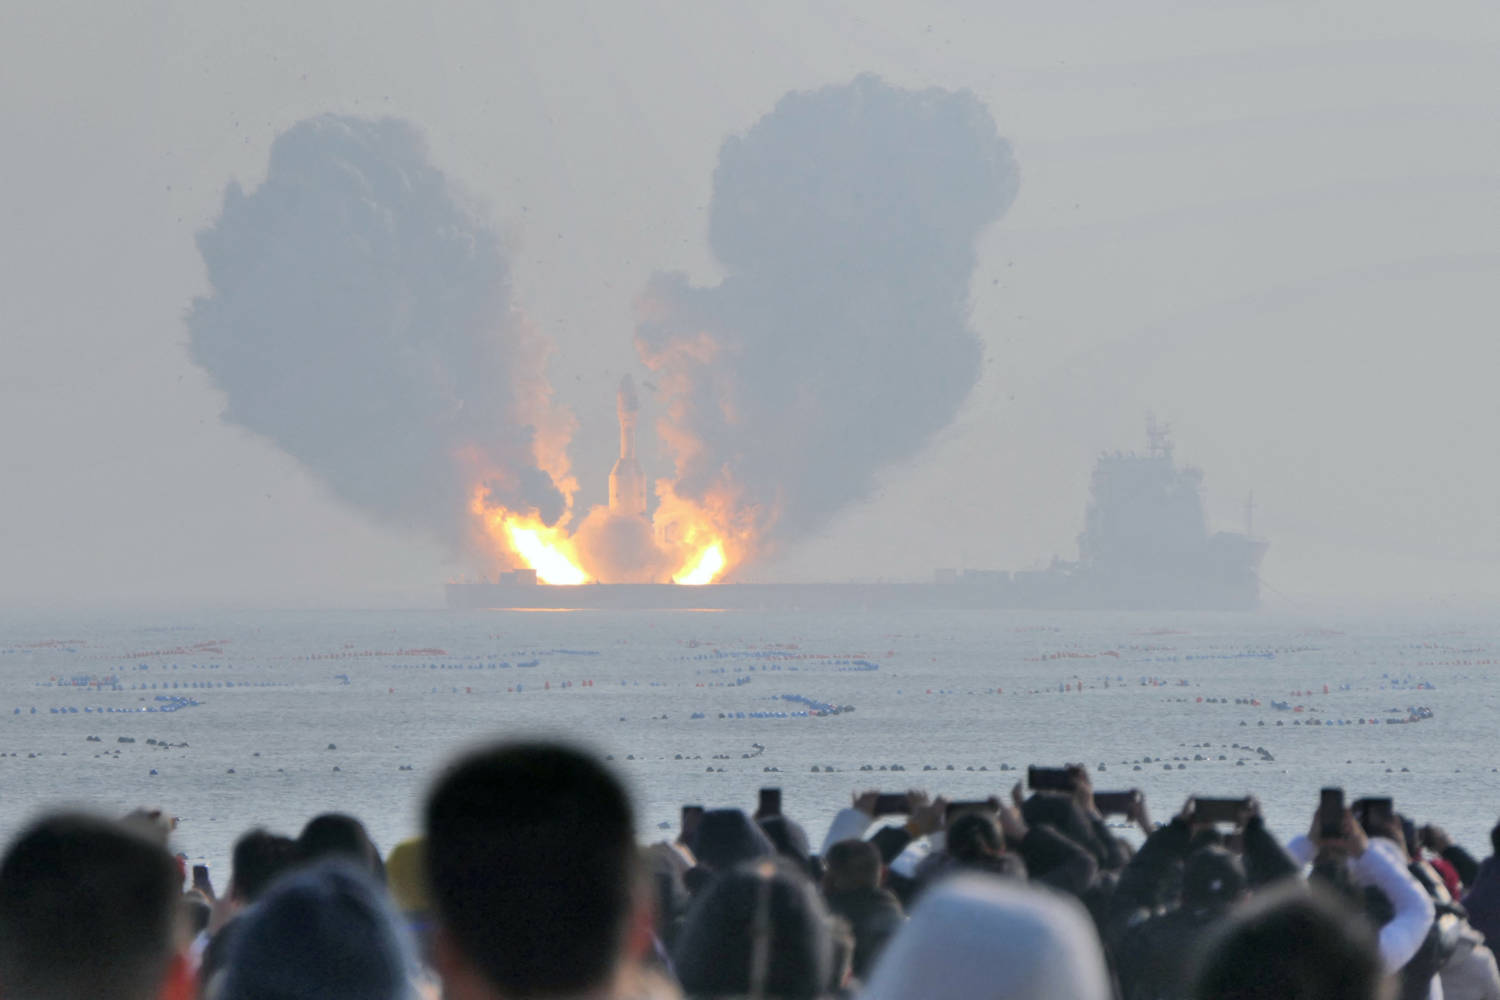 File Photo: The Gravity 1 Rocket, Developed By Chinese Company Orienspace, Takes Off From A Ship Off The Coast Of Haiyang